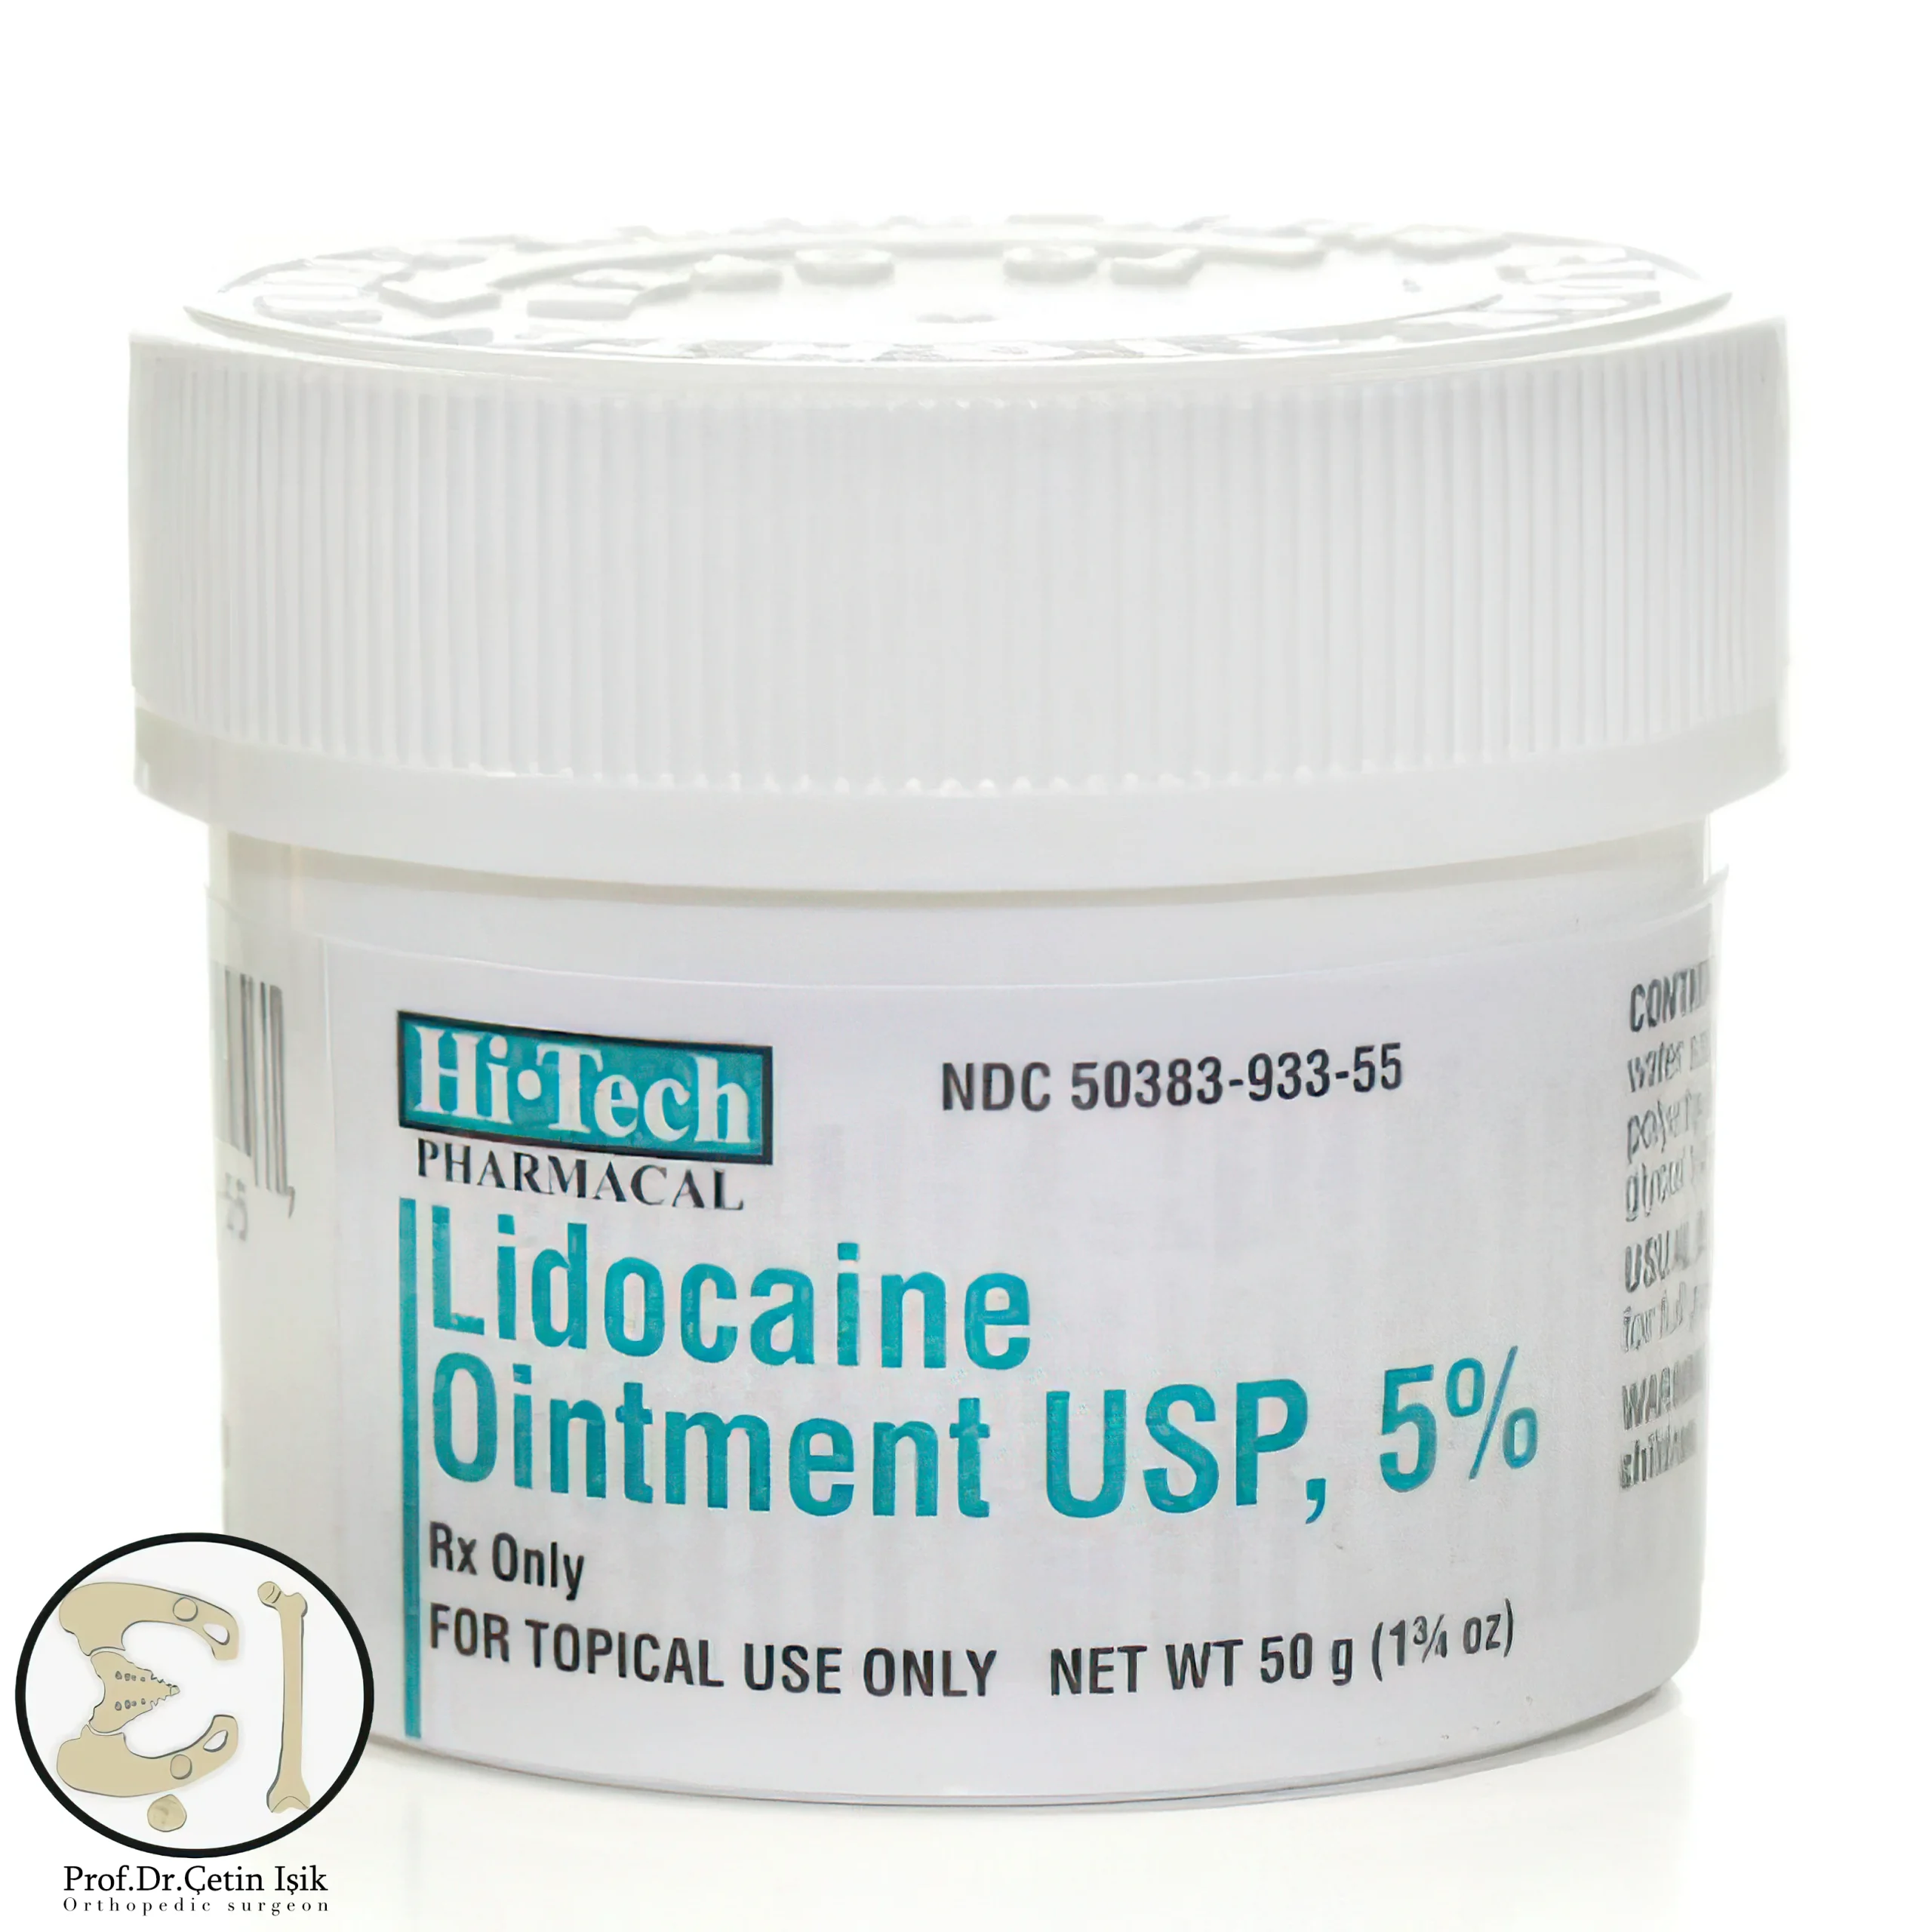 Lidocaine ointment 5% used to relieve joint pain. It cannot be considered the best ointment for arthritis because its effect is limited to pain without treating inflammation